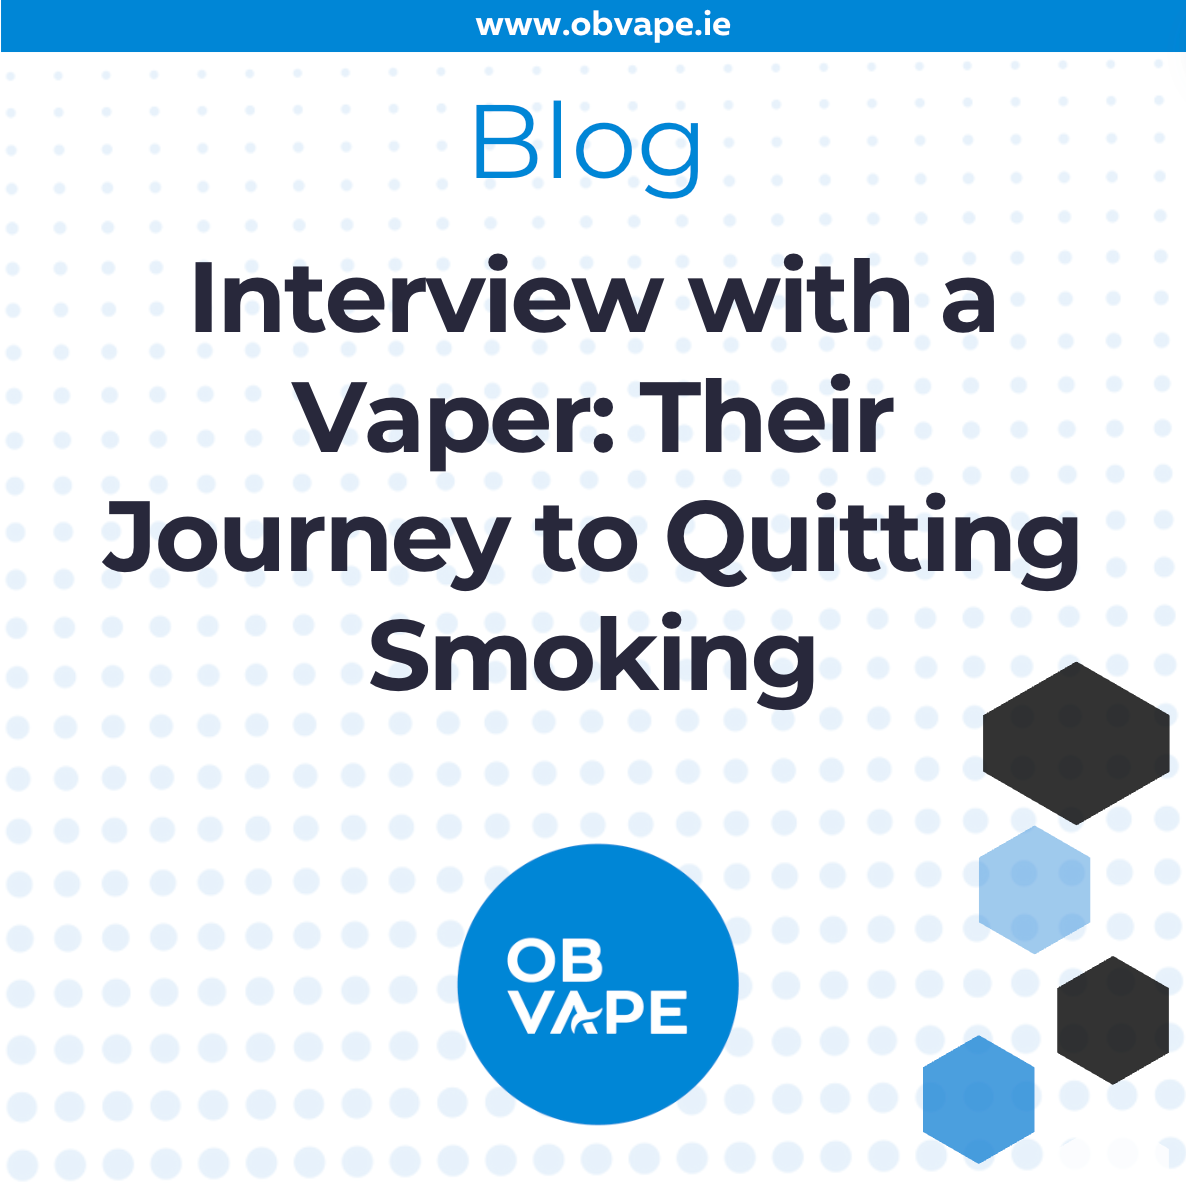 Interview with a Vaper: Their Journey to Quitting Smoking